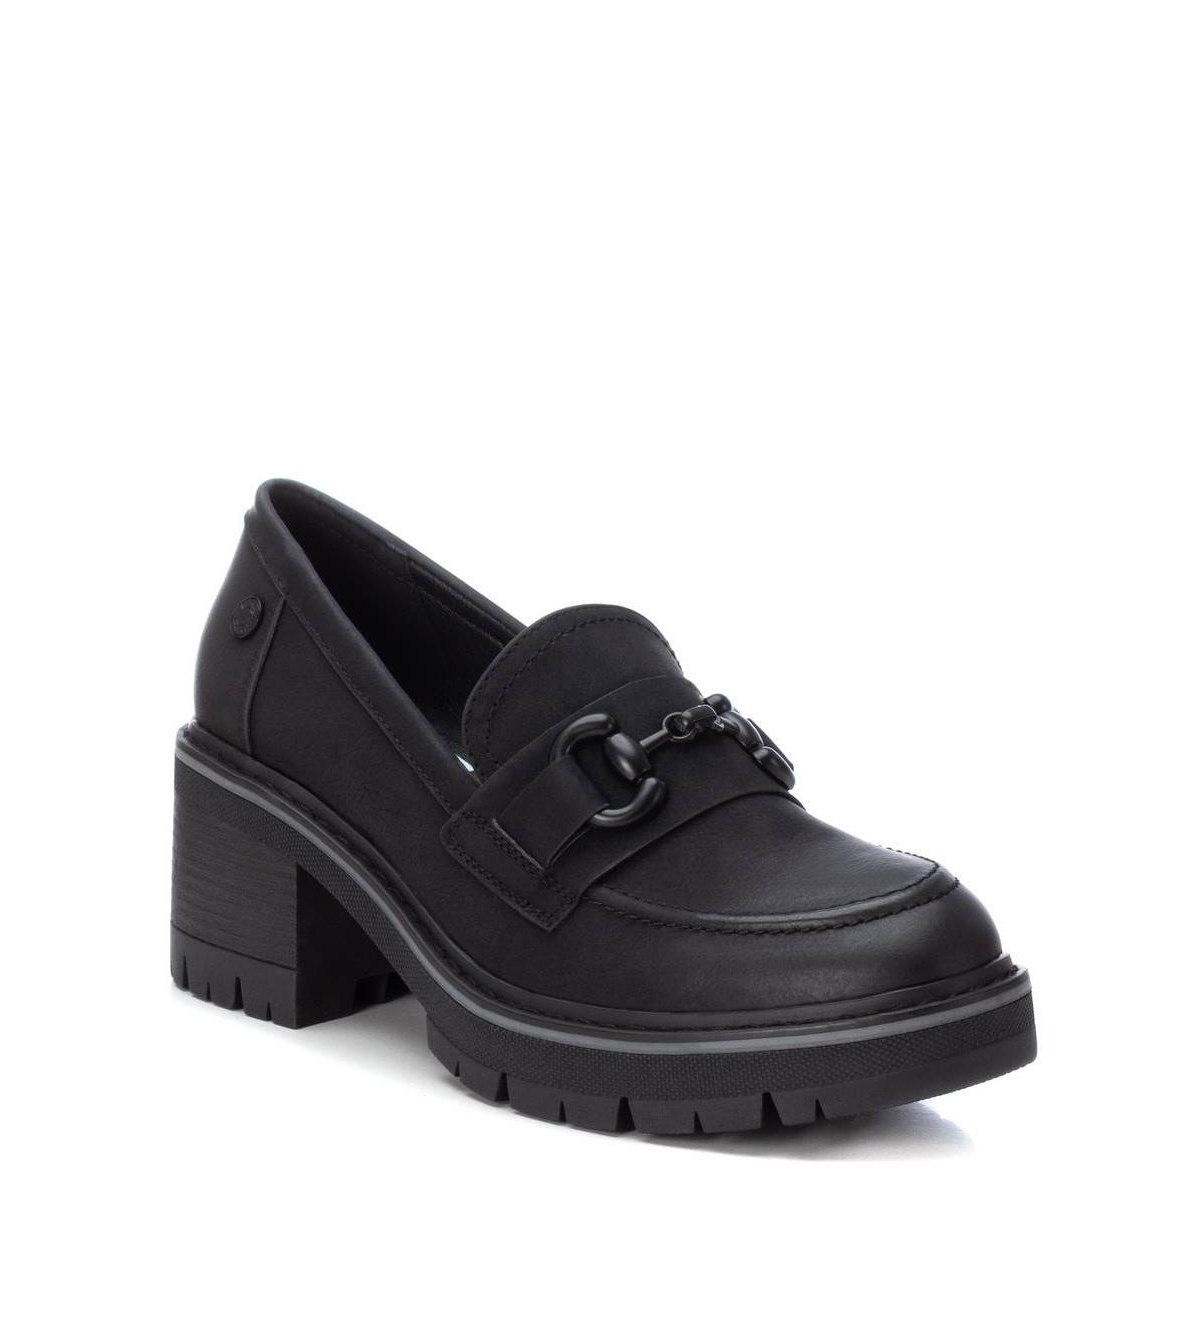 Women's Heeled Moccasins By Xti - Black